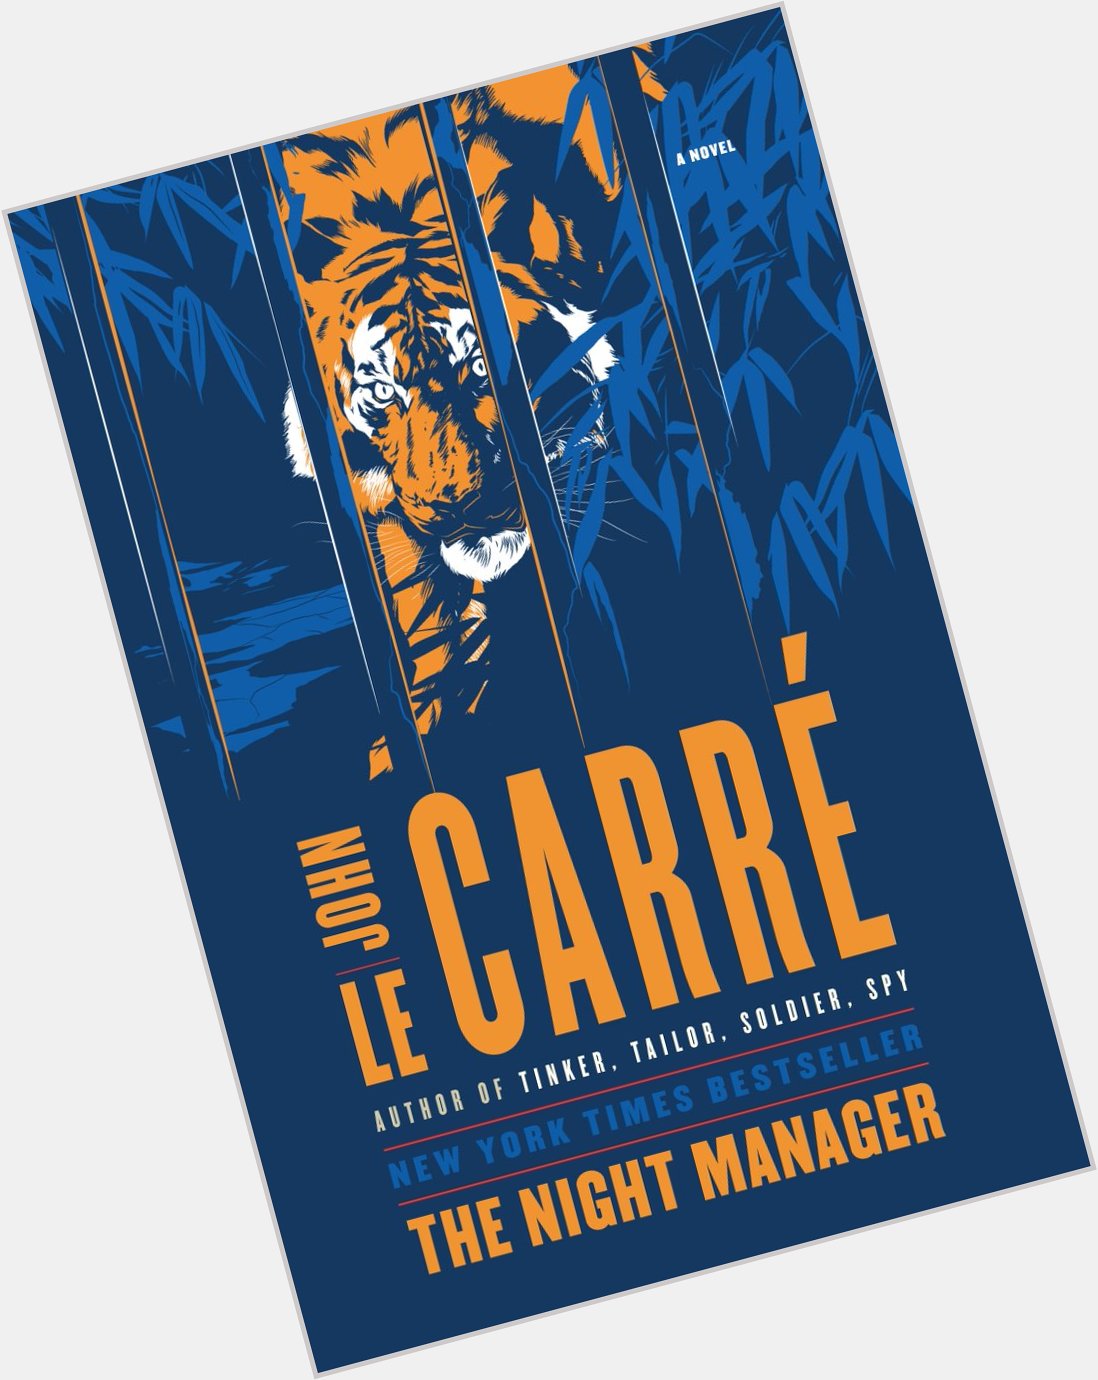 We wish the excellent John le Carré a very happy birthday! 

\"The neglected are too easily killed.\" 